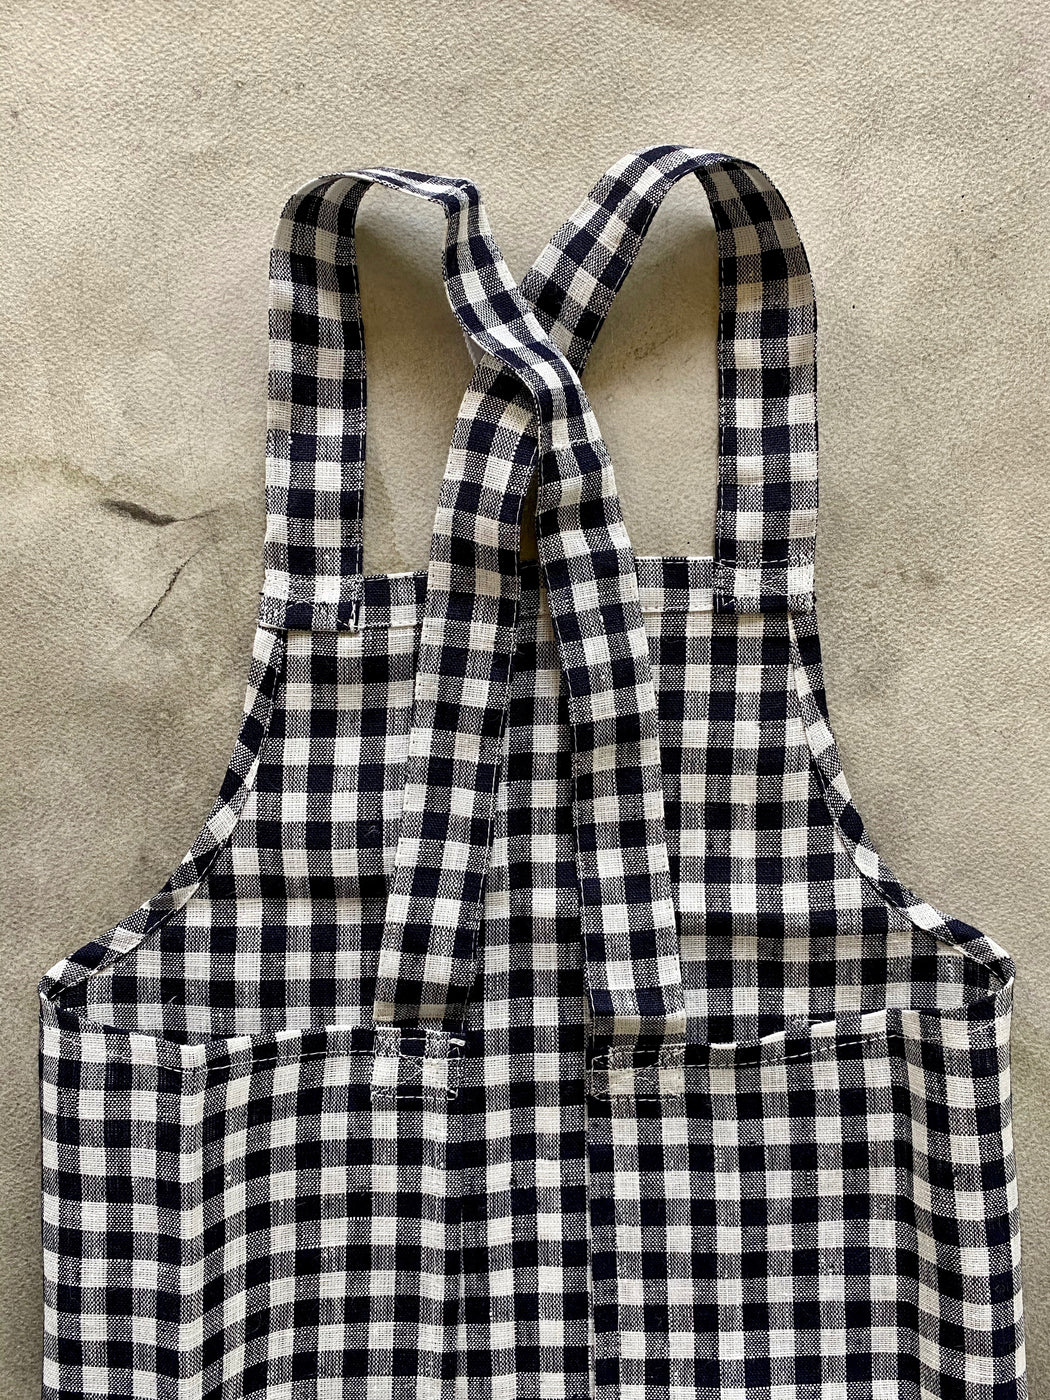 Childs Apron by Fog Linen Work